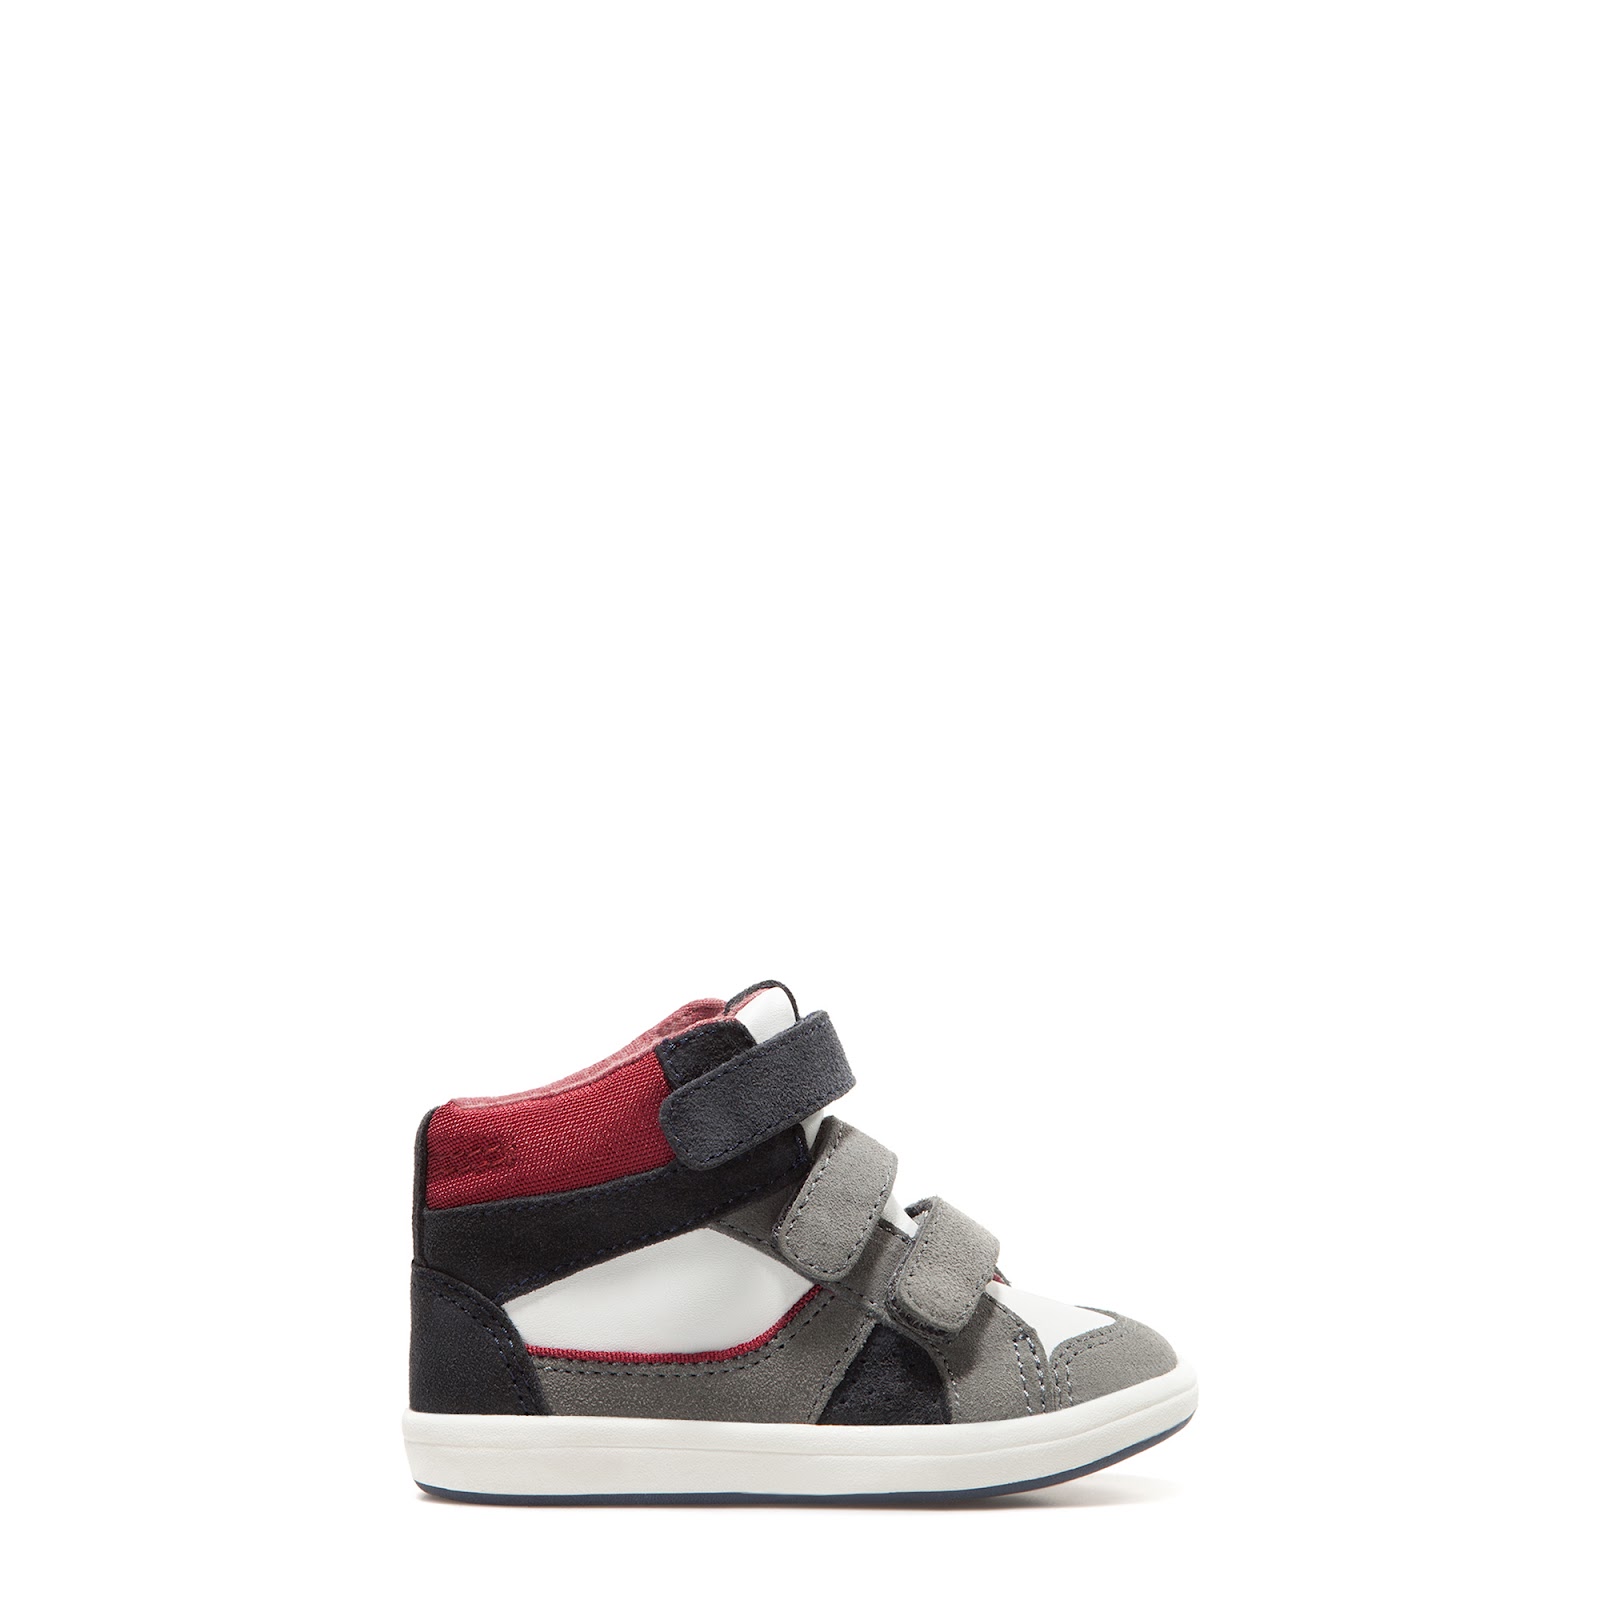 Collection Zara  Baby  Boys Shoes  Automne hiver 2012 2013 